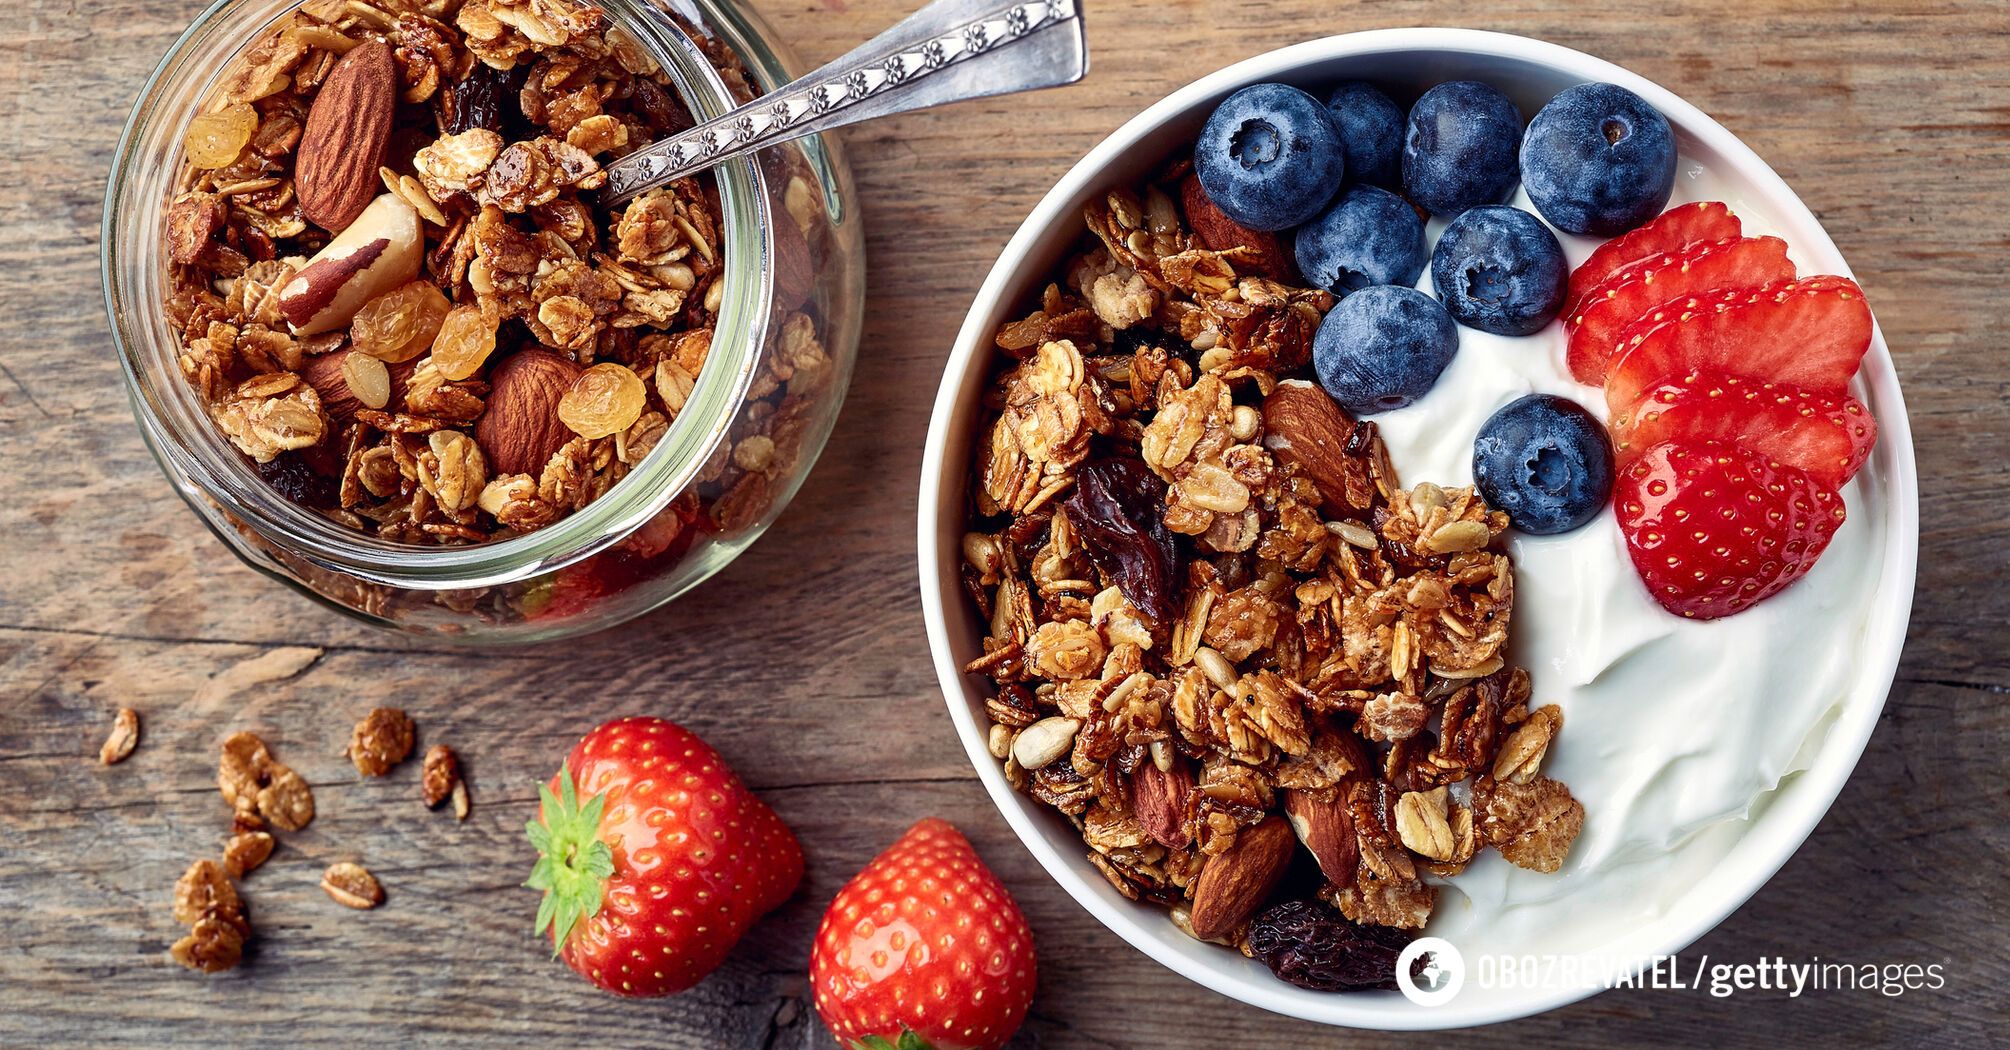 Granola consists of healthy cereals, dried fruits and nuts